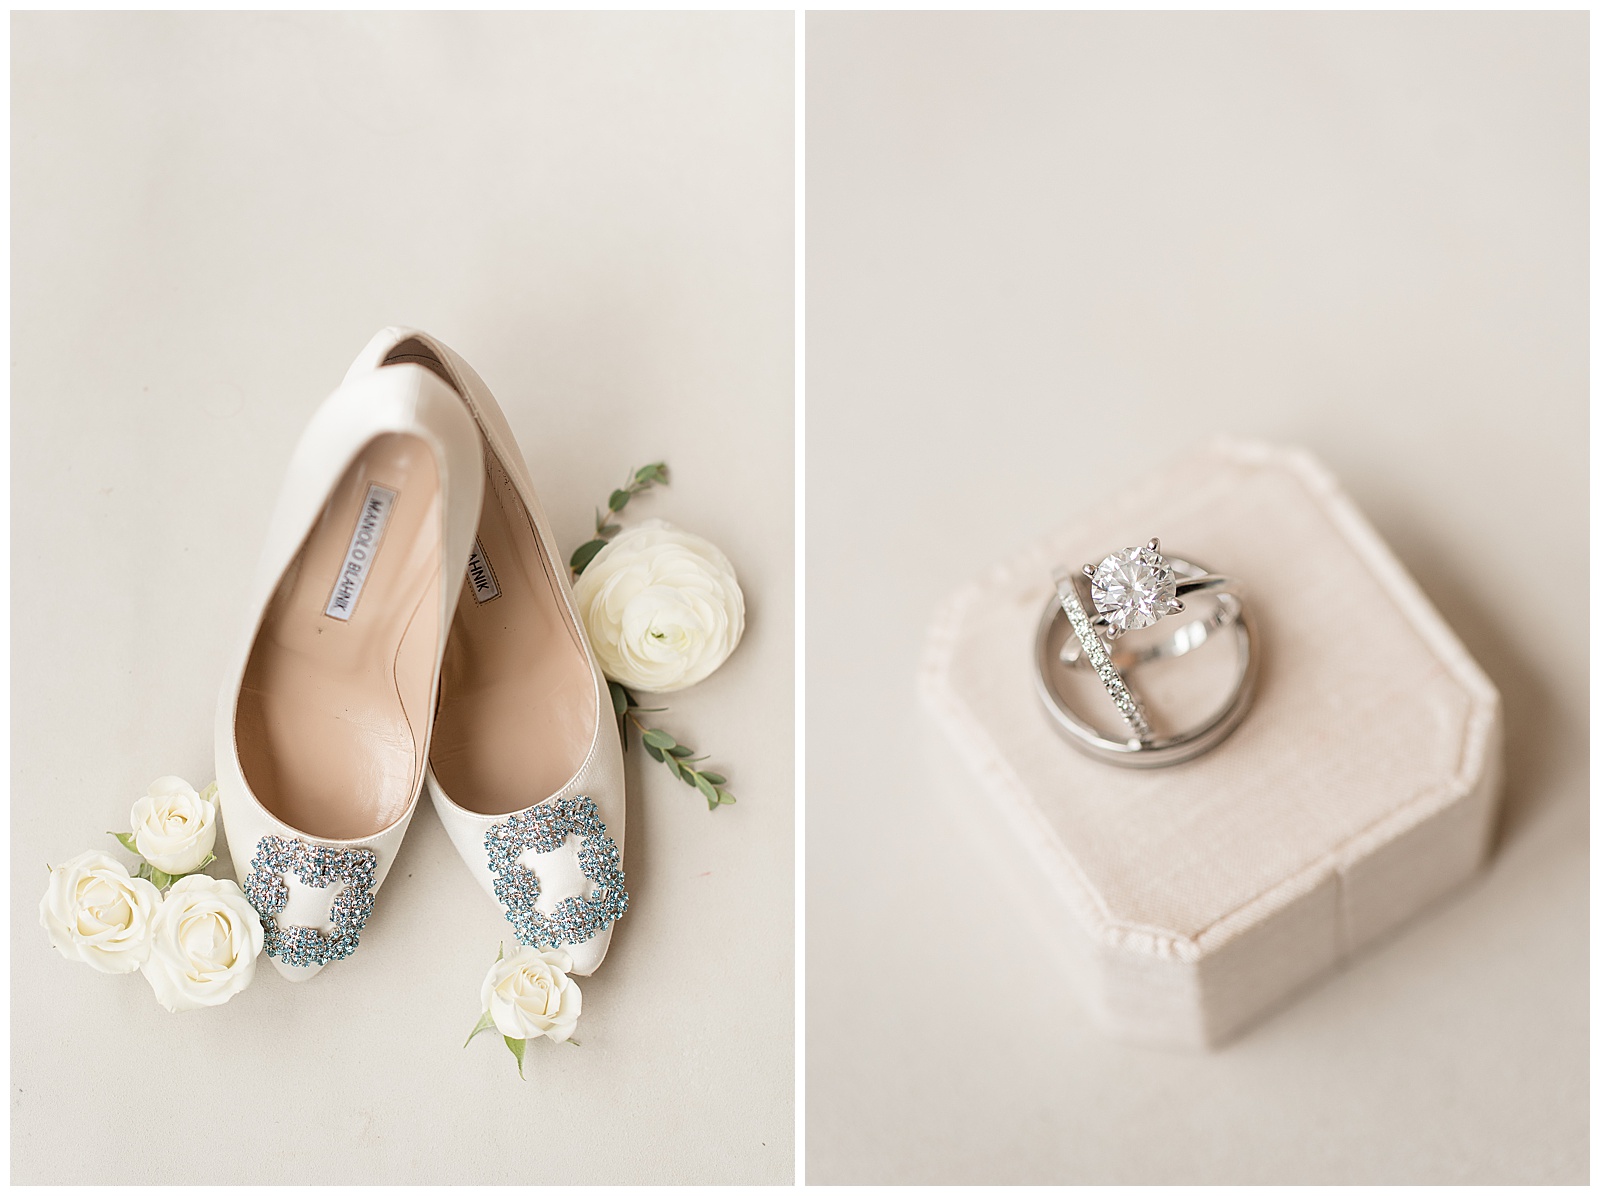 christian louboutin bridal shoes with rhinestones displayed with white roses and wedding rings in white box